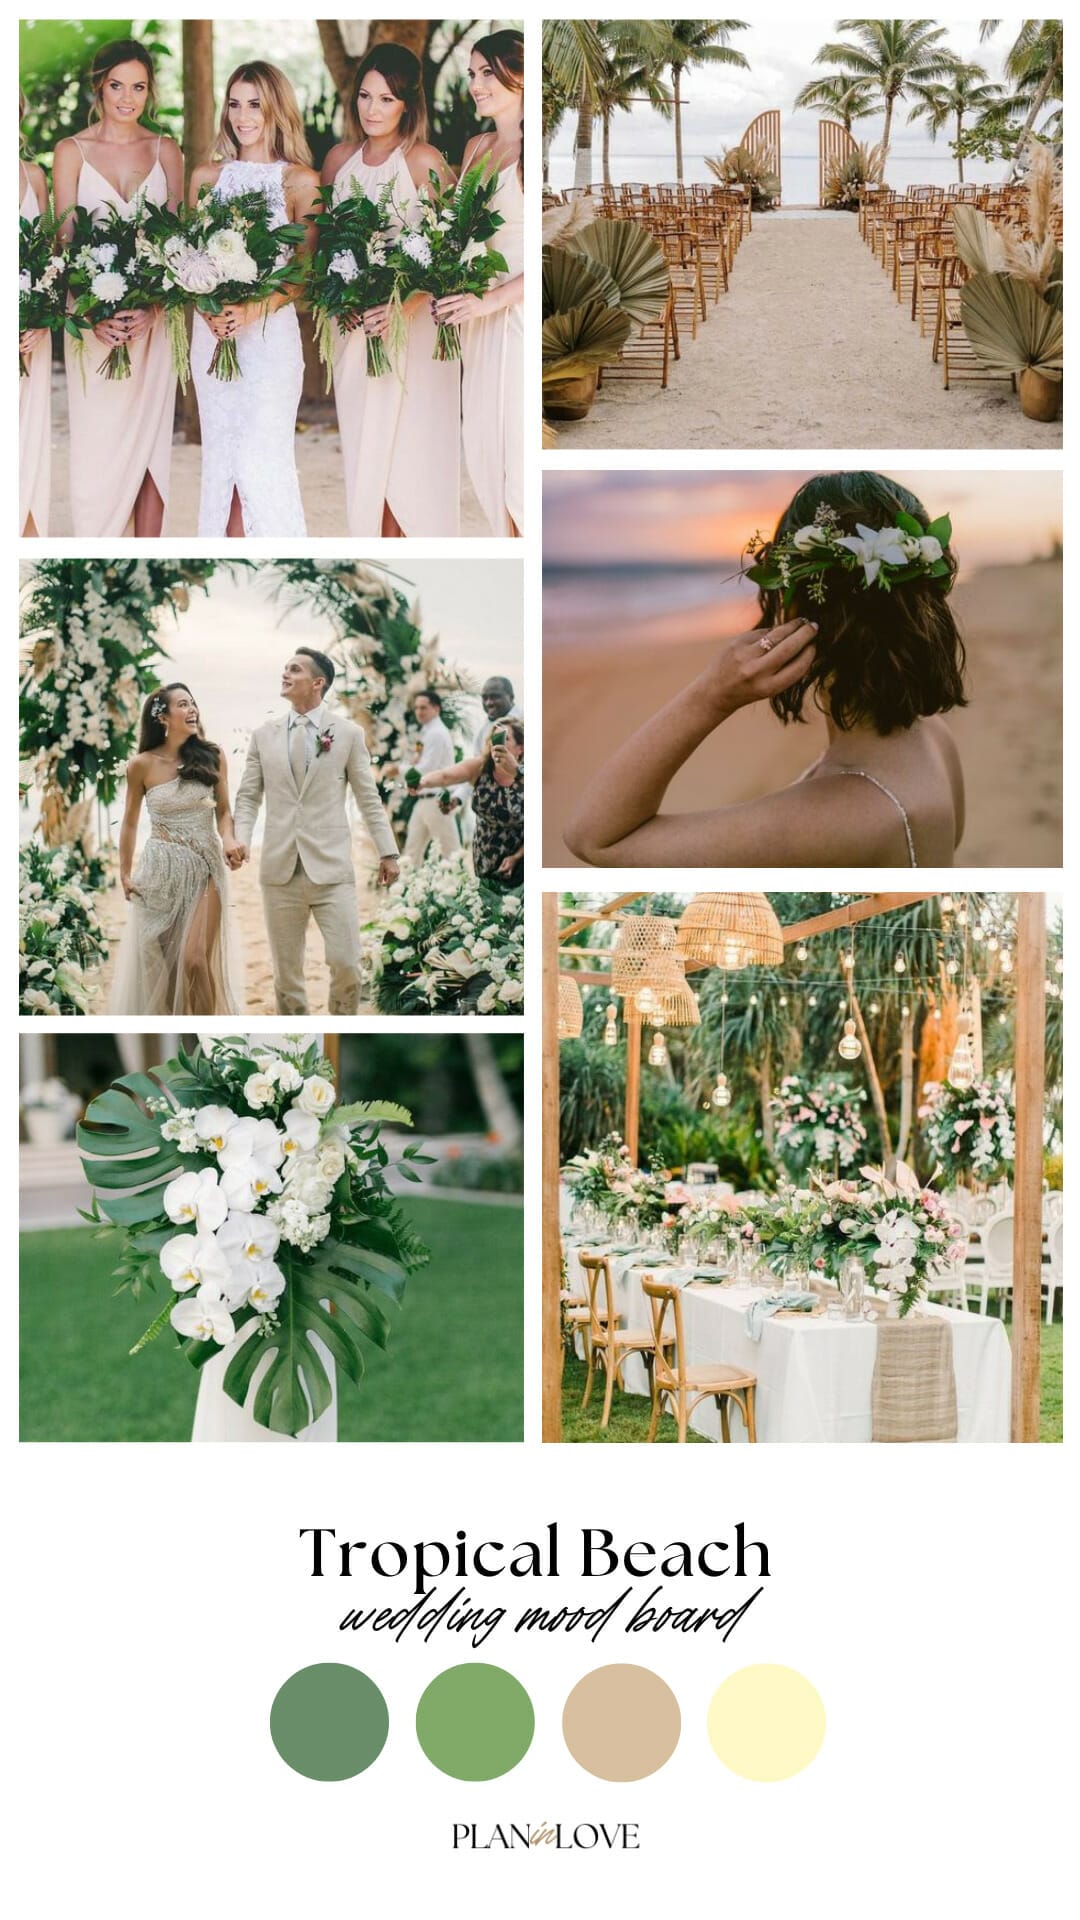 Tropical Beach Wedding Mood Board Inspiration Color Palette Plan In Love